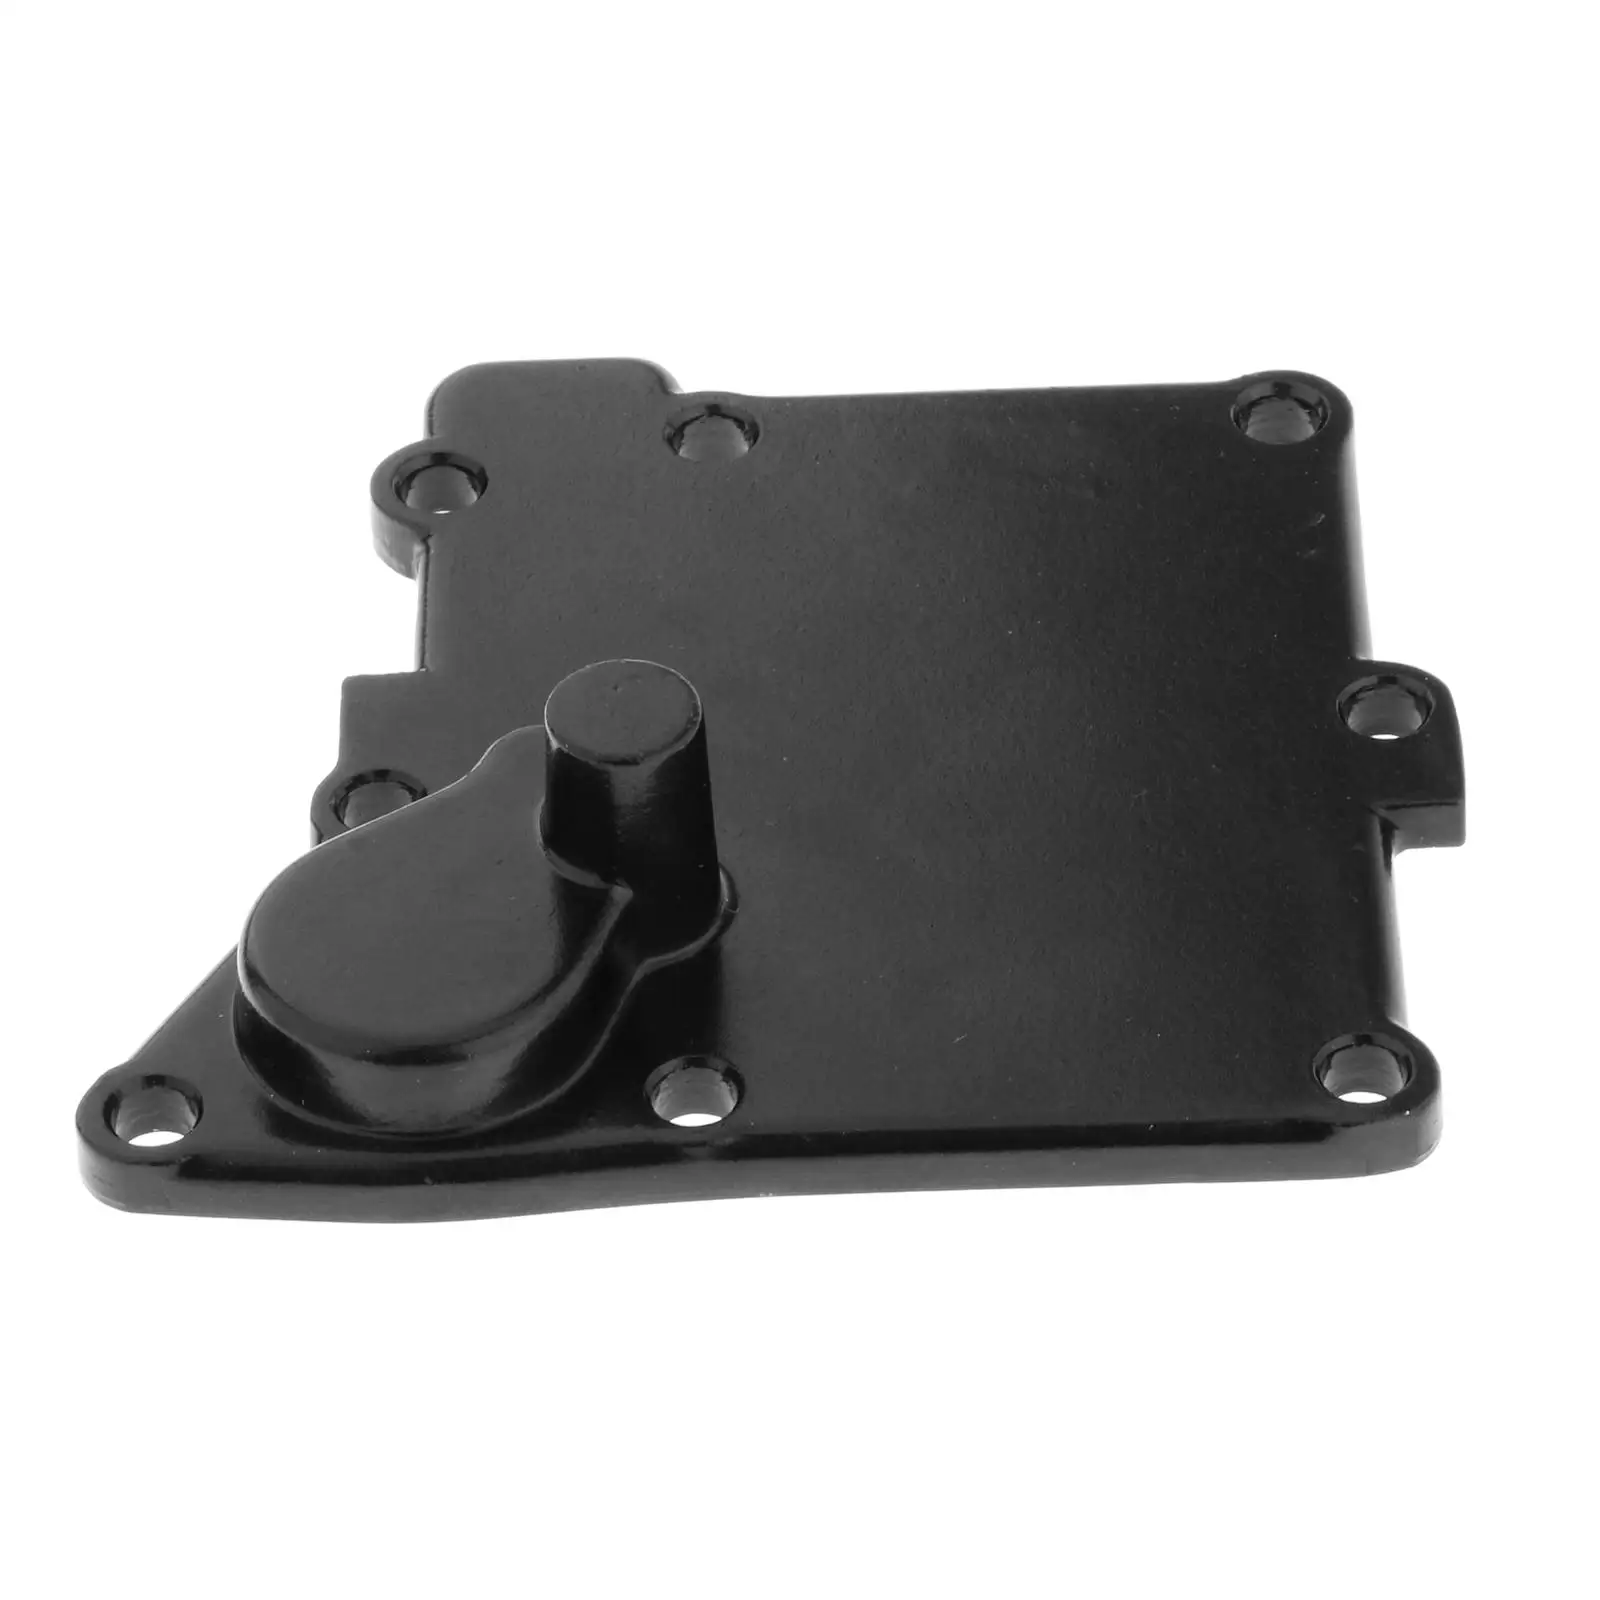 Exhaust Outter Cover Spare Parts Compatible with Yamaha 5HP 2T Outboard Parts 6E3-41113-01-9M